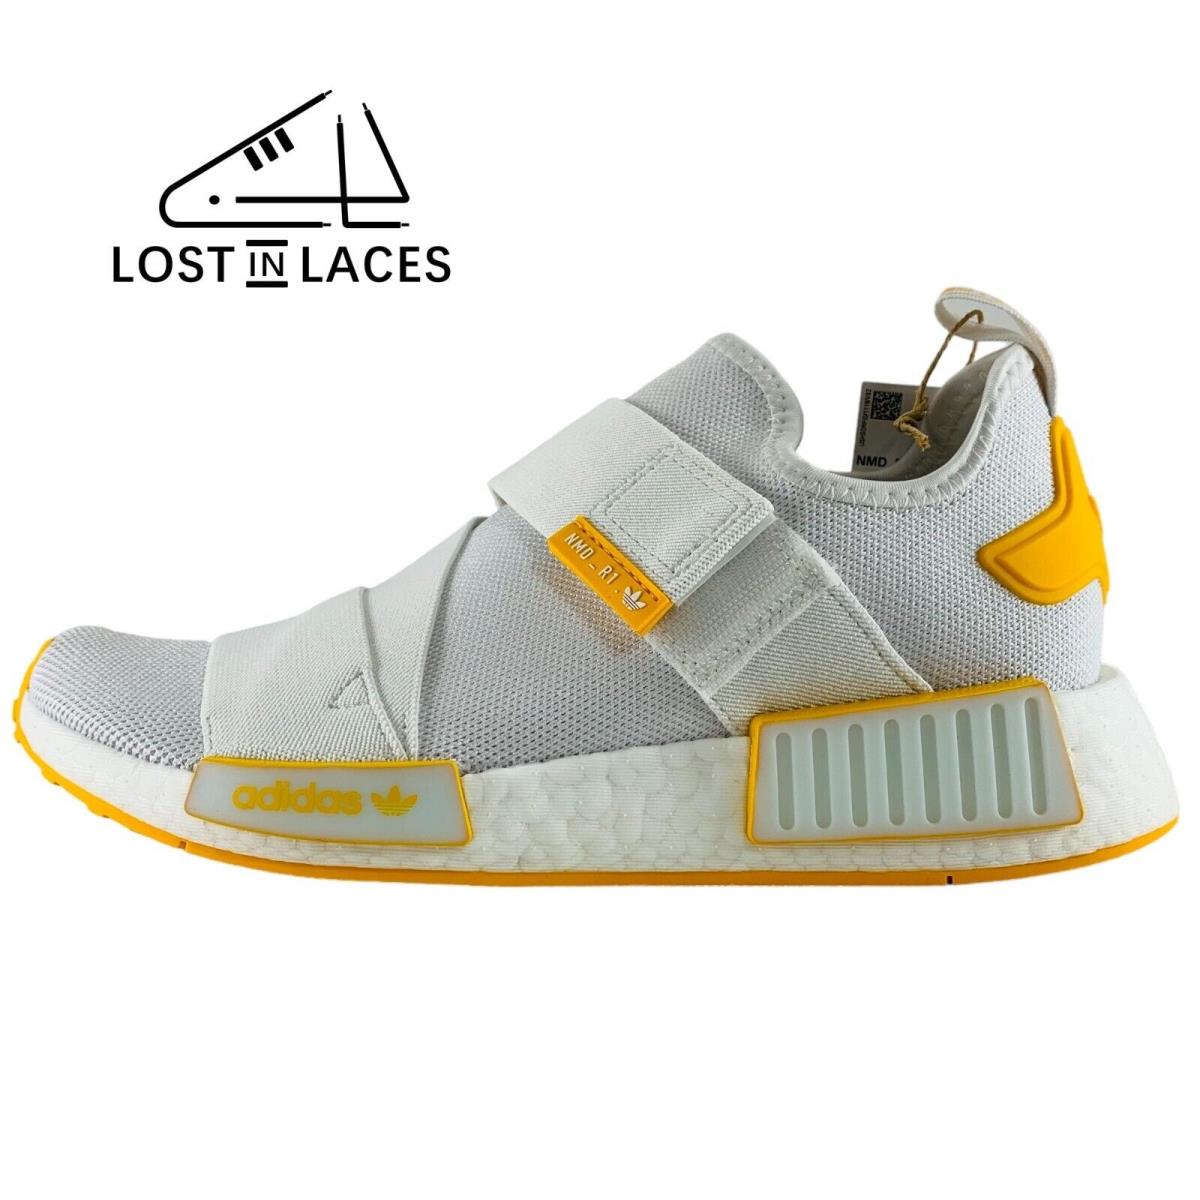 Adidas NMD_R1 Strap White Collegiate Gold Sneakers Shoes Women`s Sizes